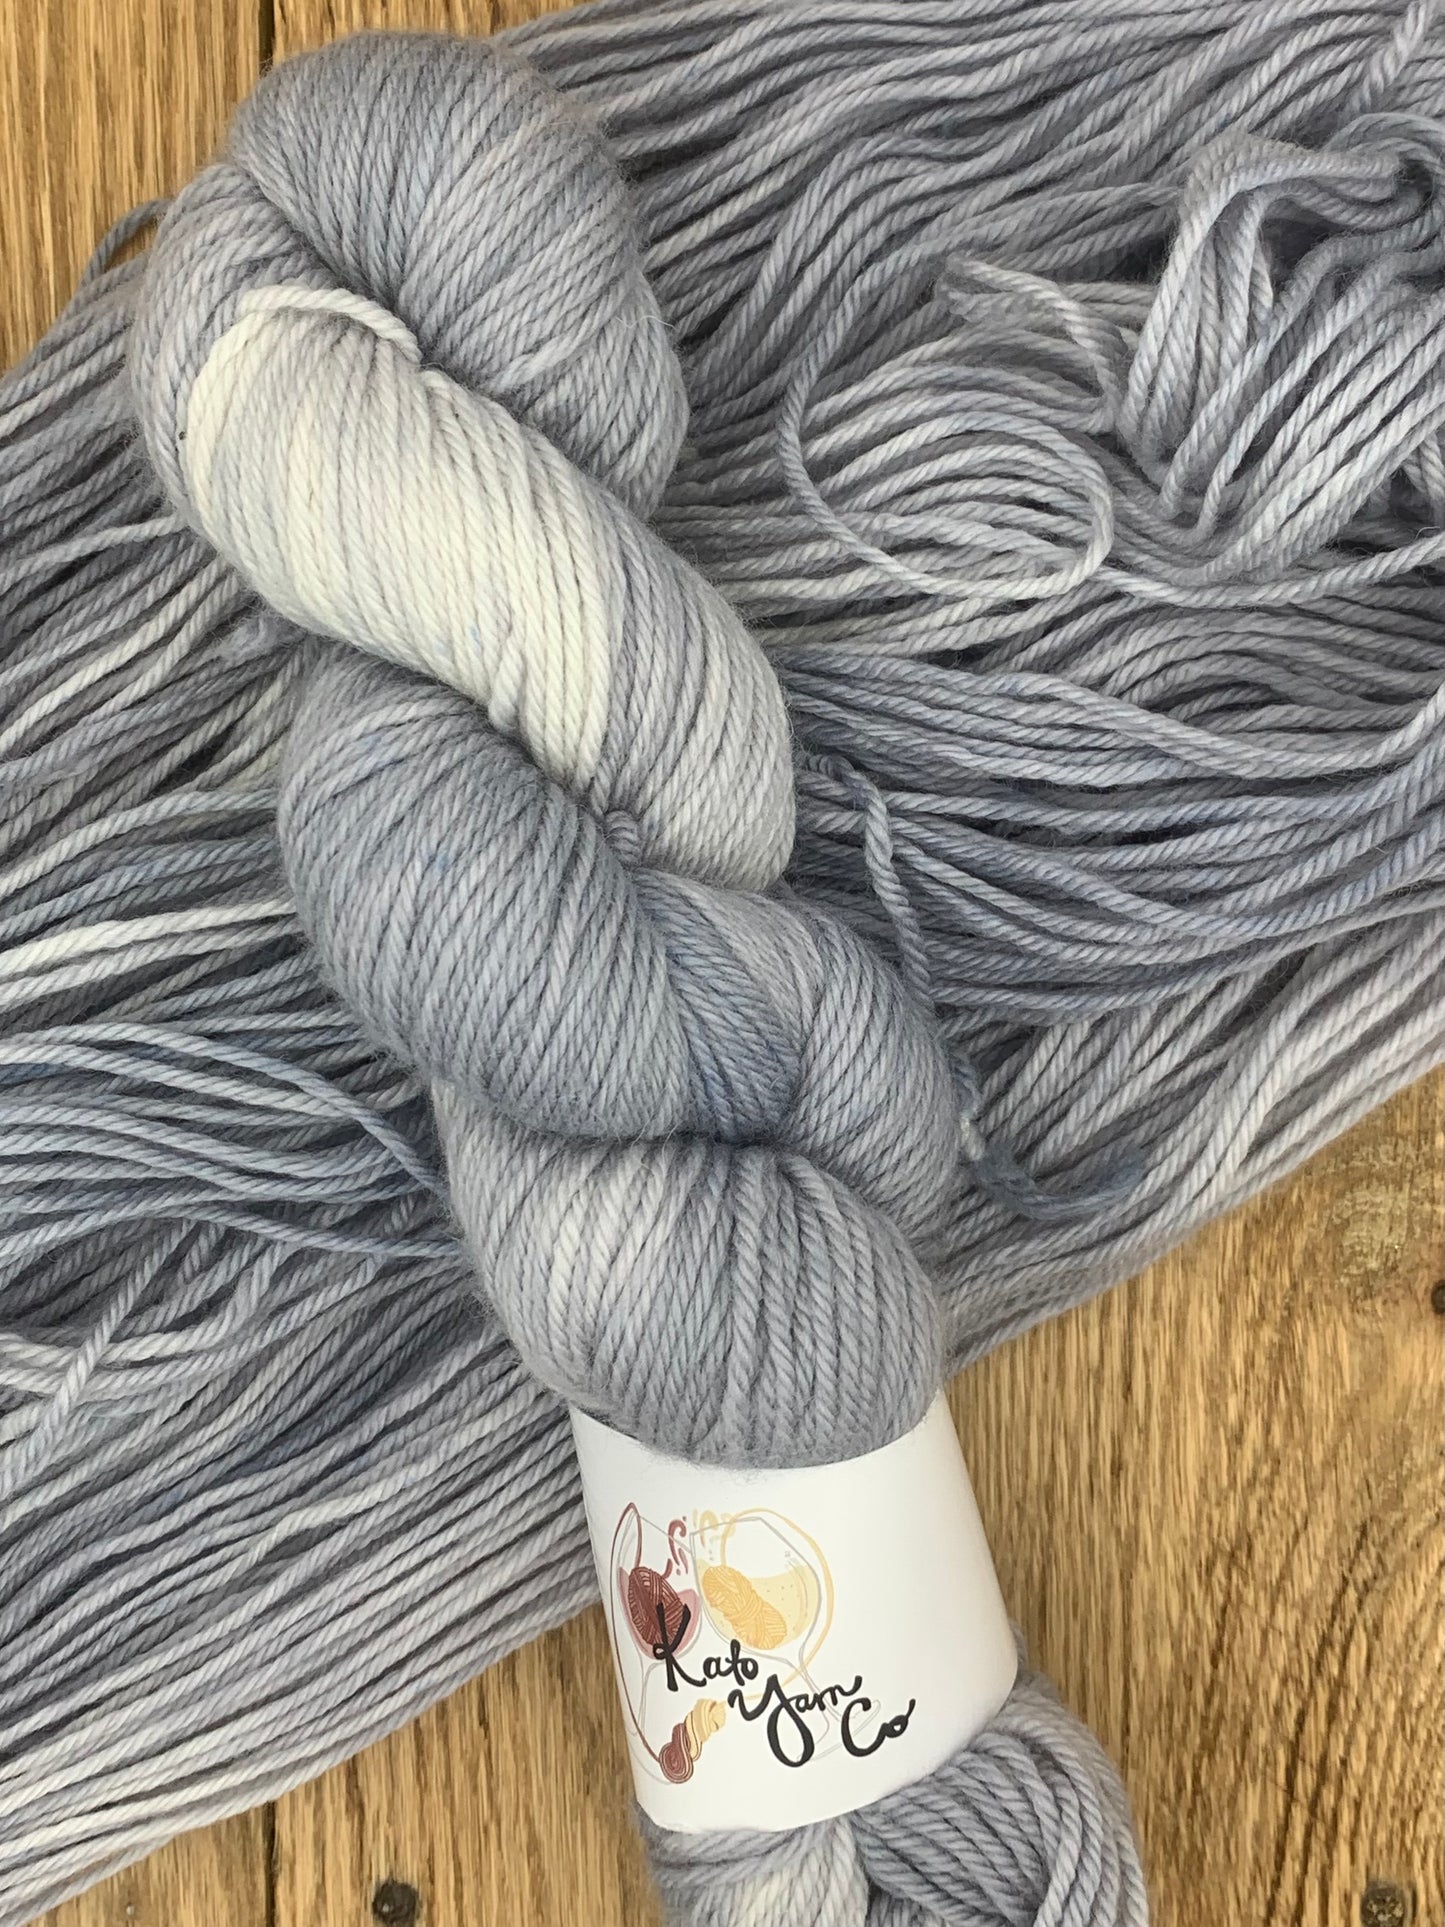 Snug - Non SW Worsted